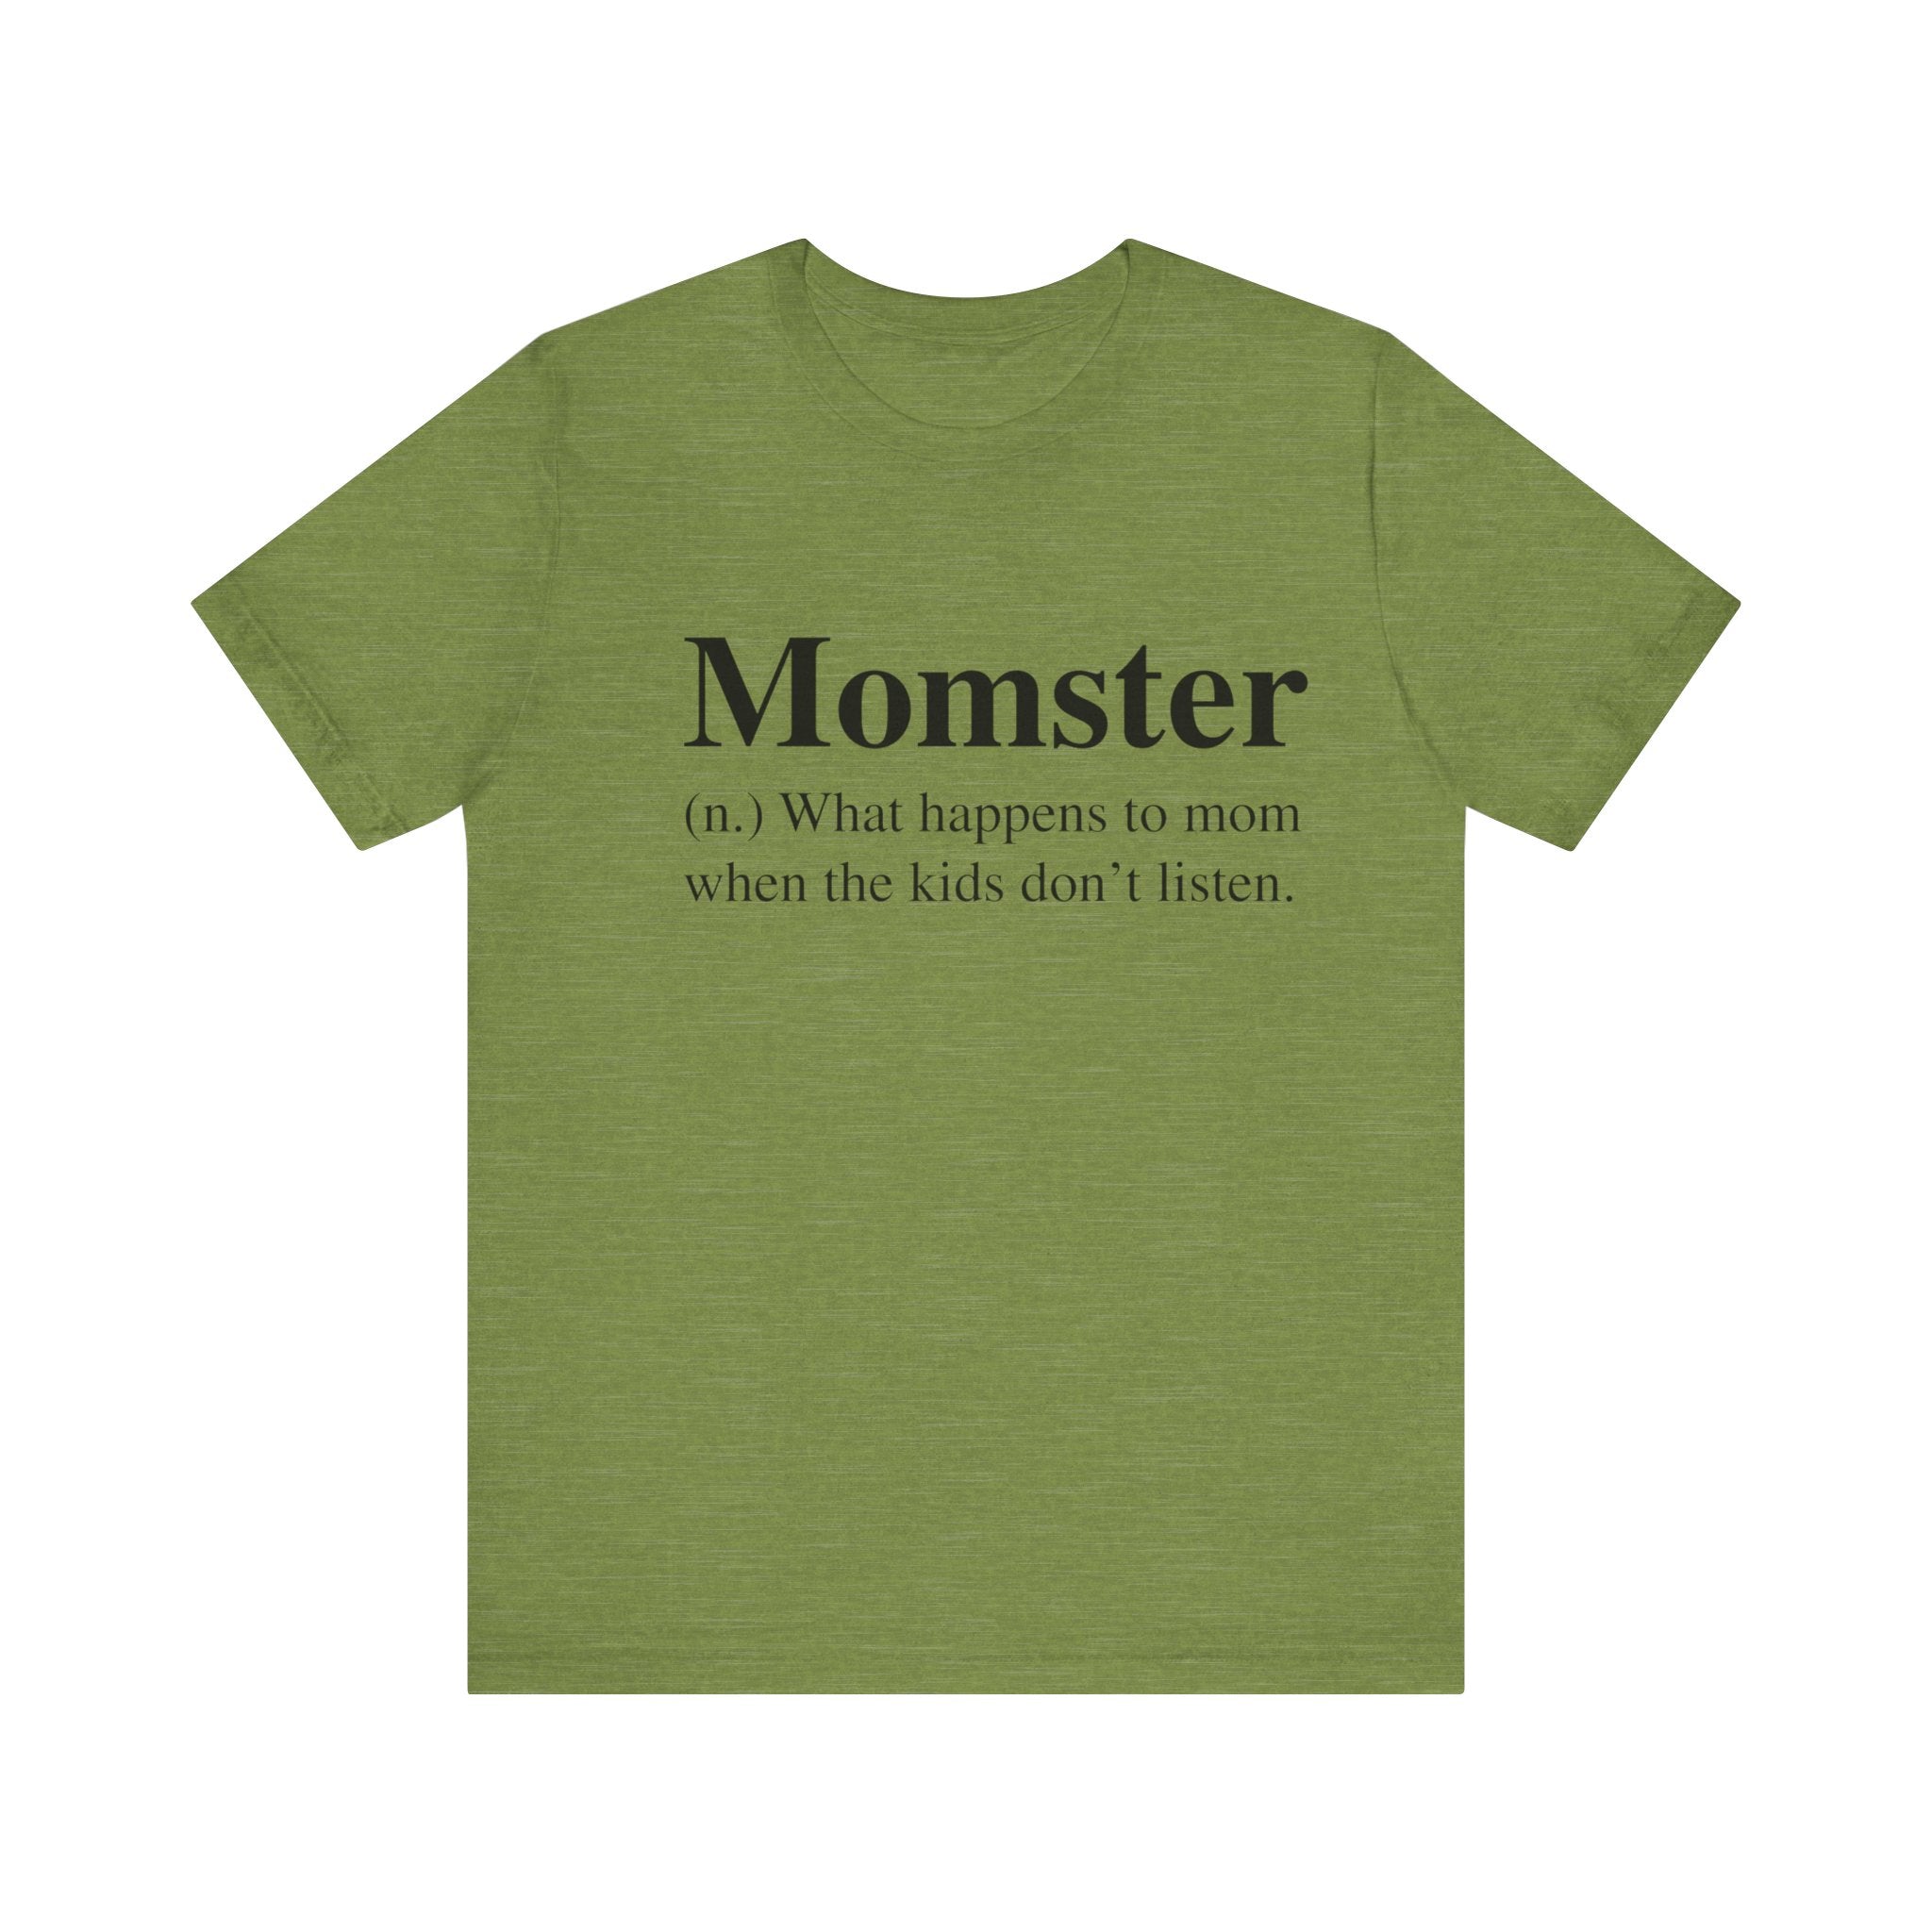 Unisex Momster T-Shirt with the text "Momster (n.) what happens to mom when the kids don't listen" in black font on the front.